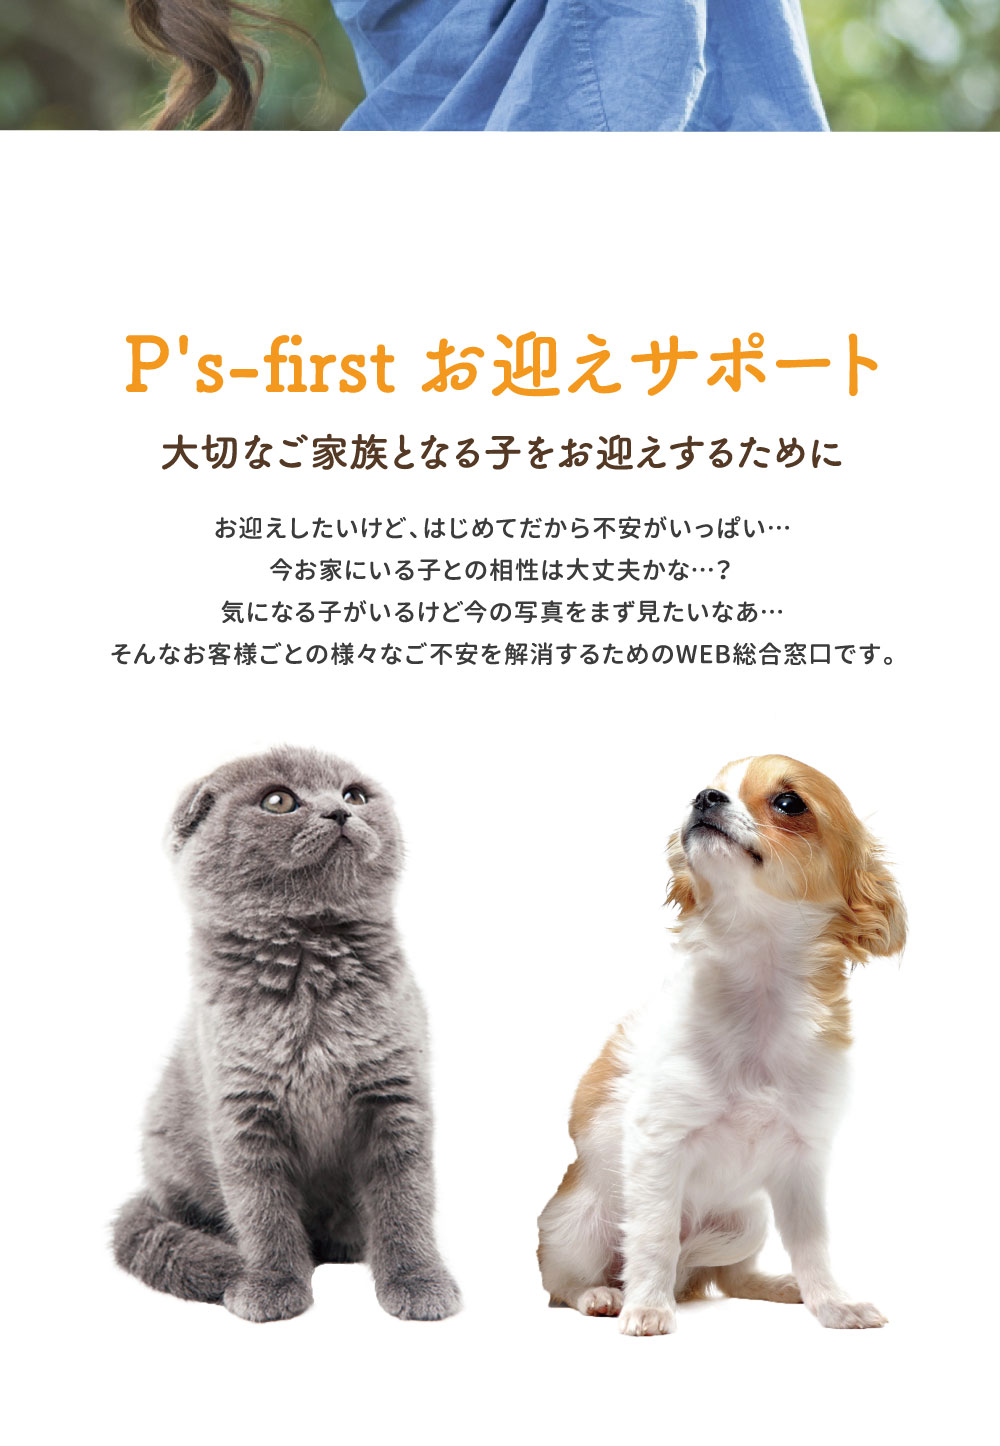 P's-firstお迎えサポート